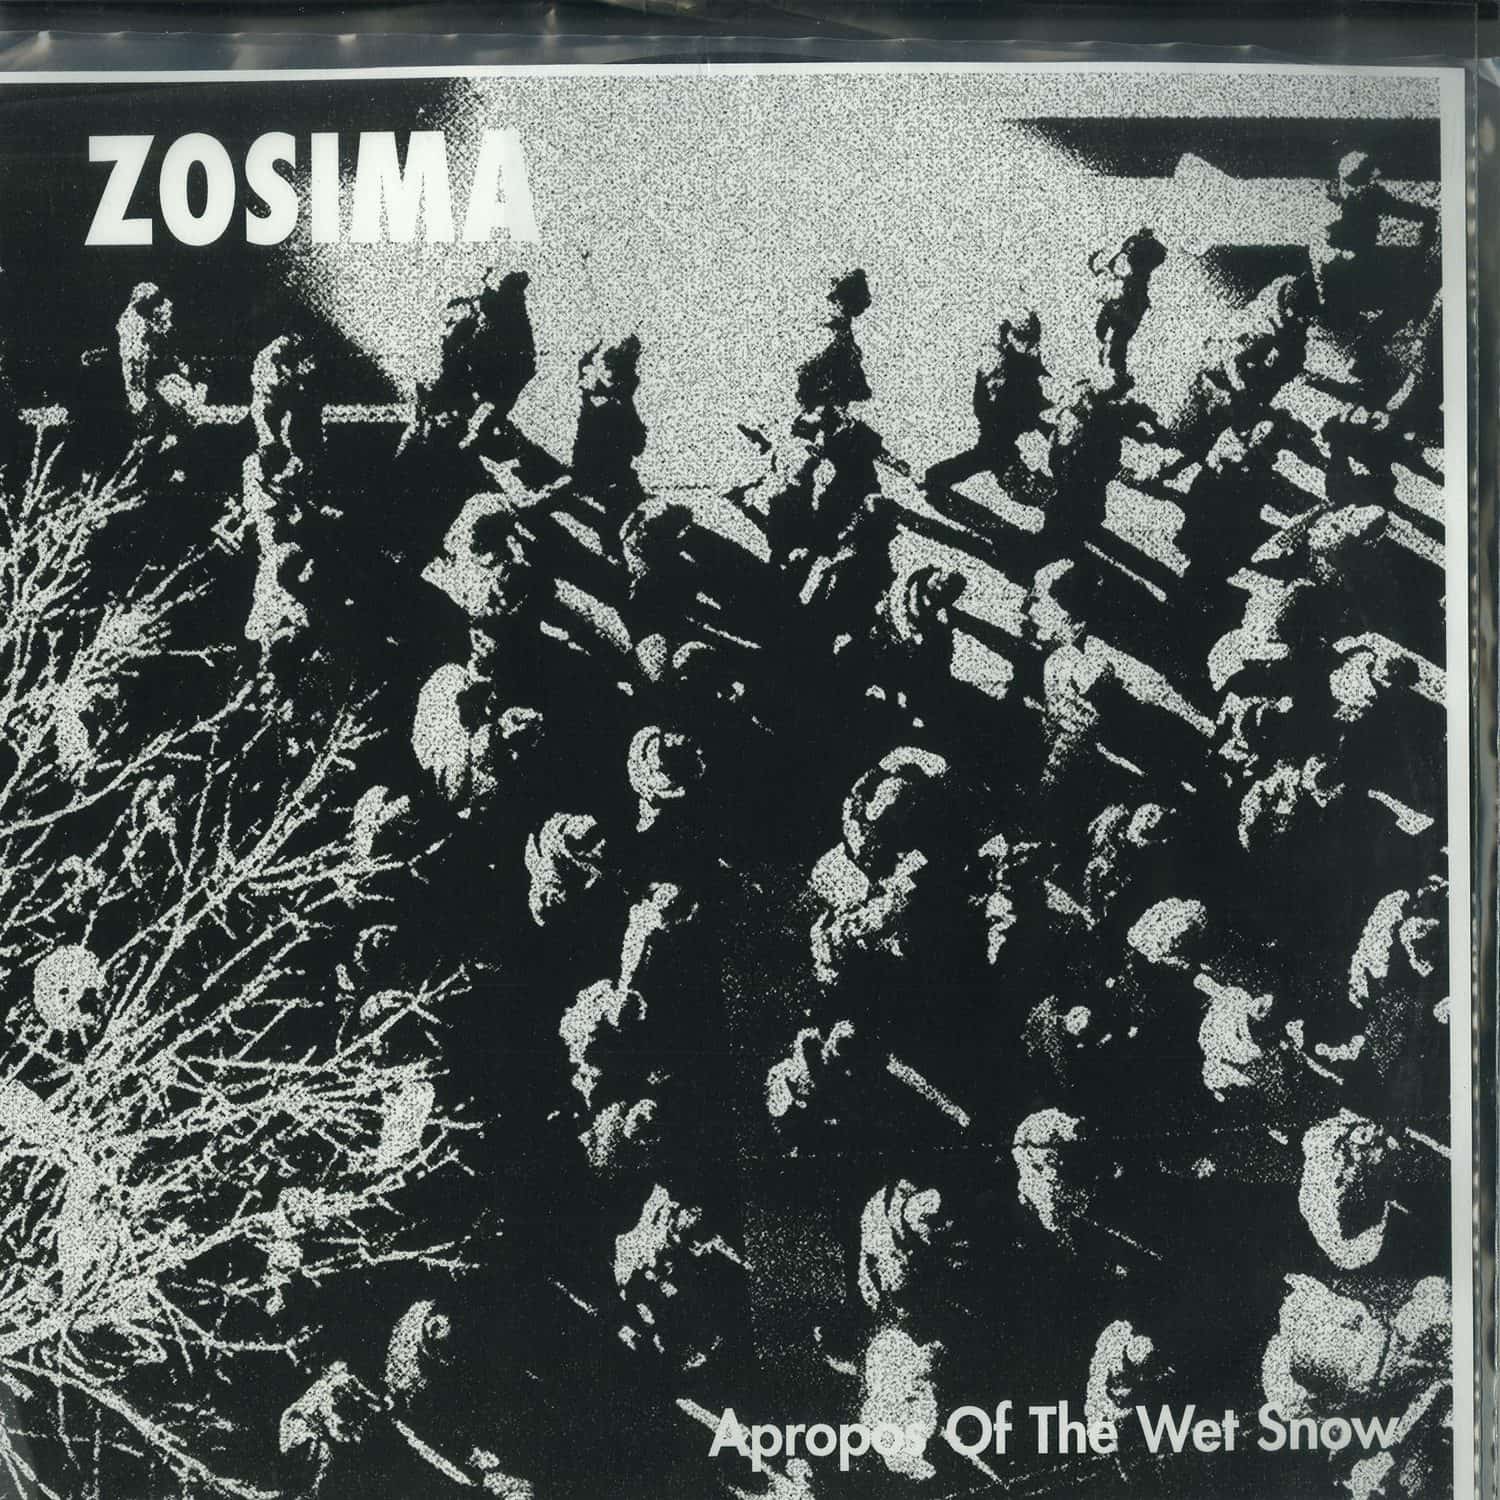 Zosima - APROPOS OF THE WET SNOW